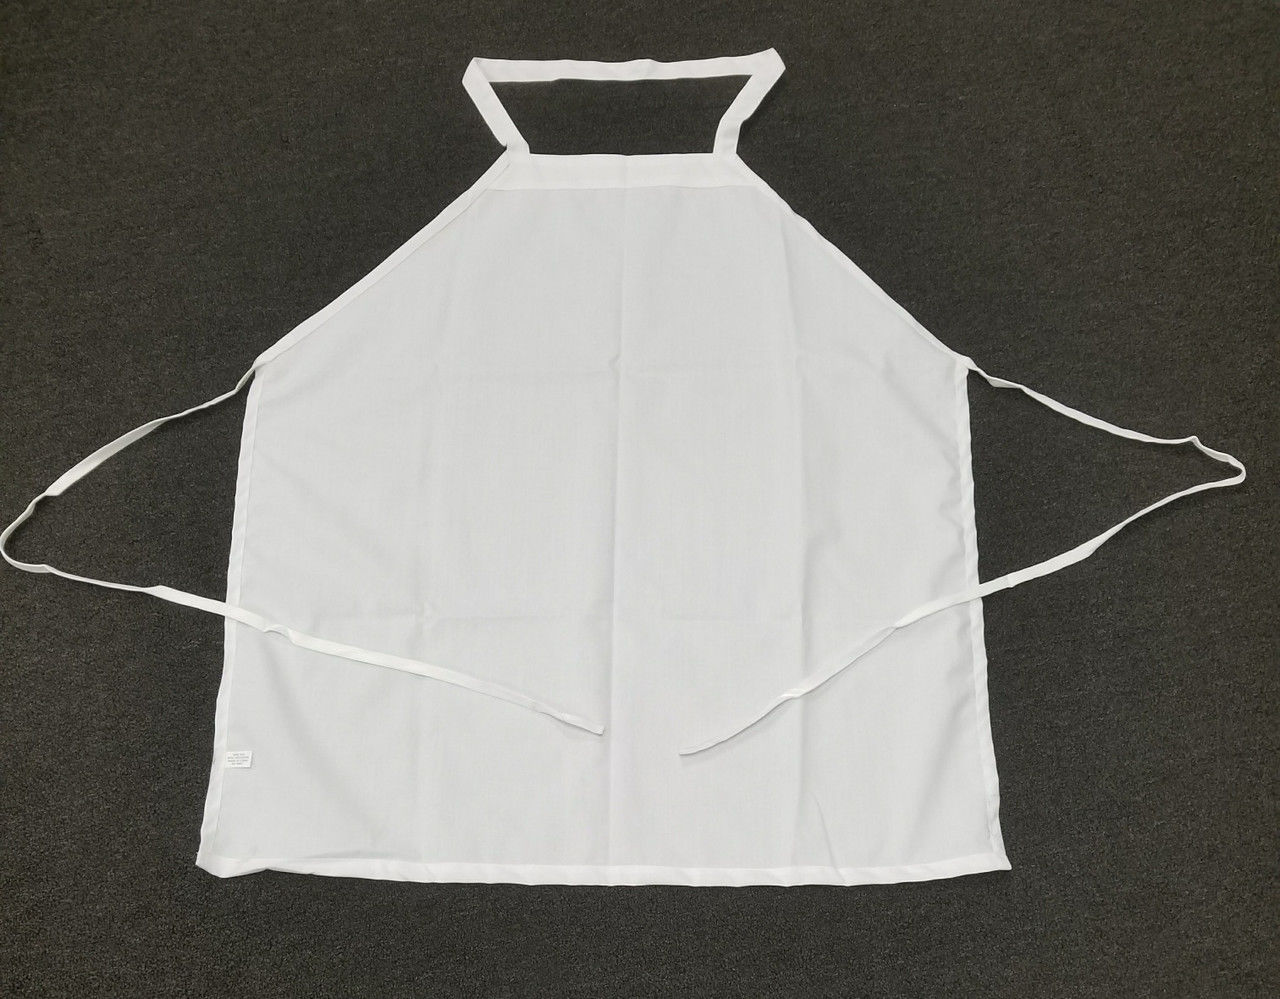 Are the white bib aprons made from polyester?